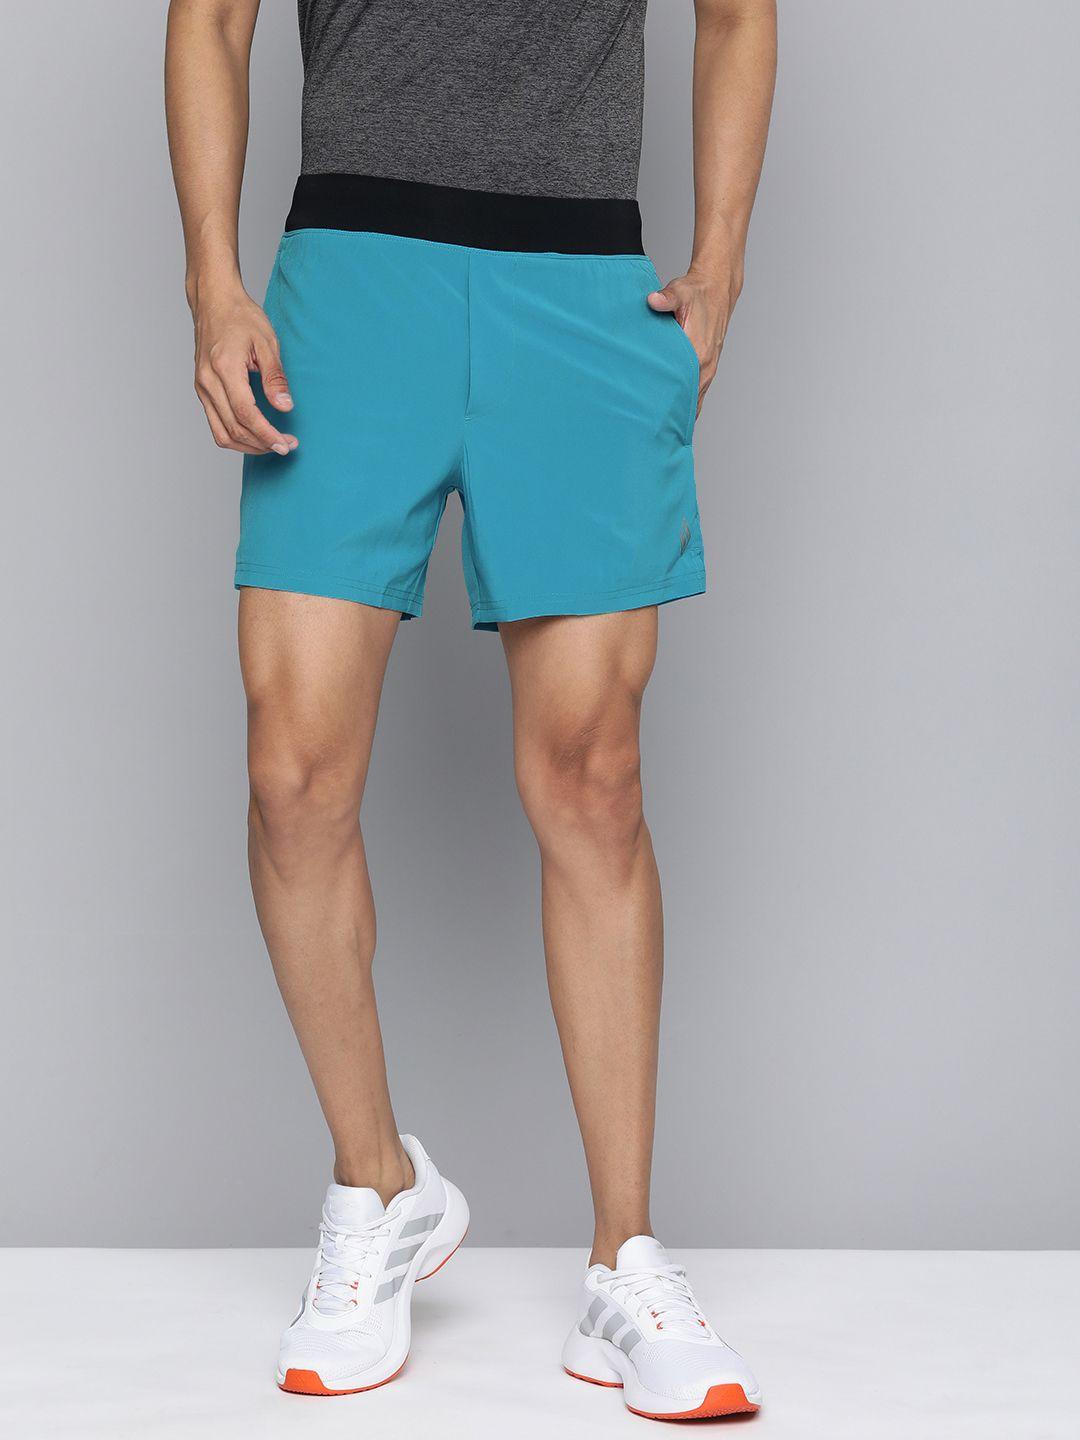 skechers men movement 5in e-dry technology sports shorts with attached inner brief